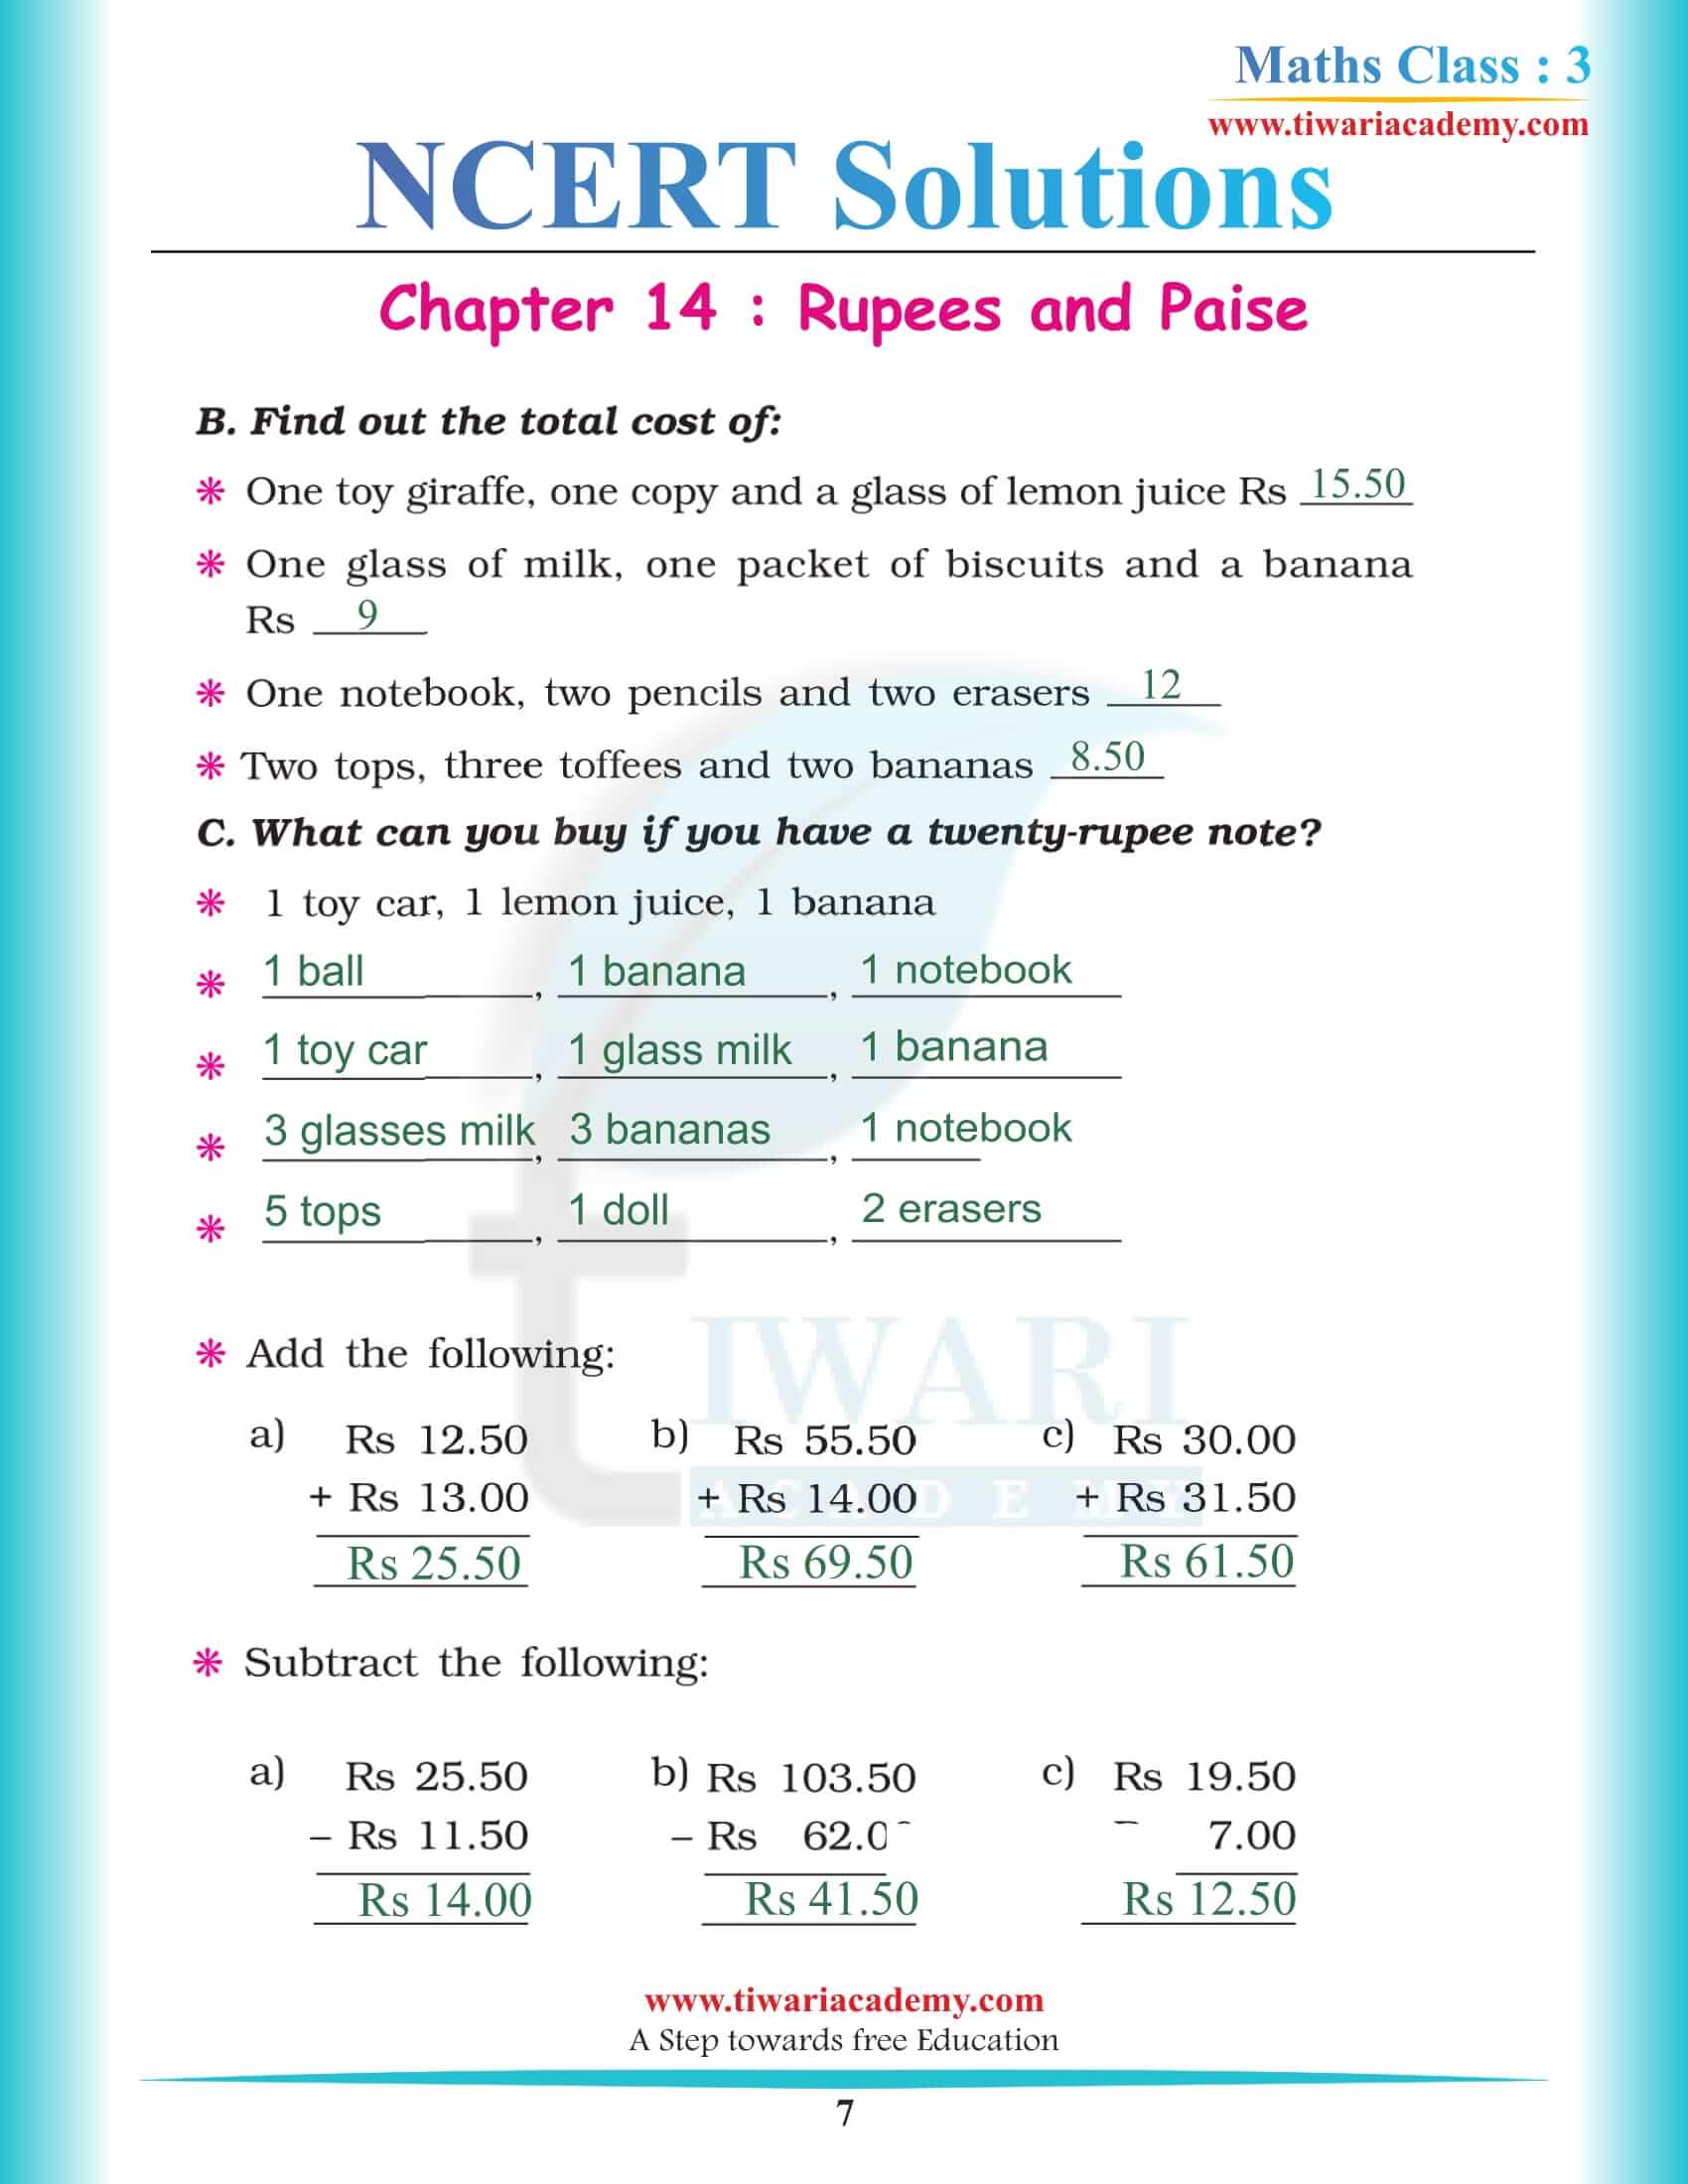 Class 3 Maths Chapter 14 download sols